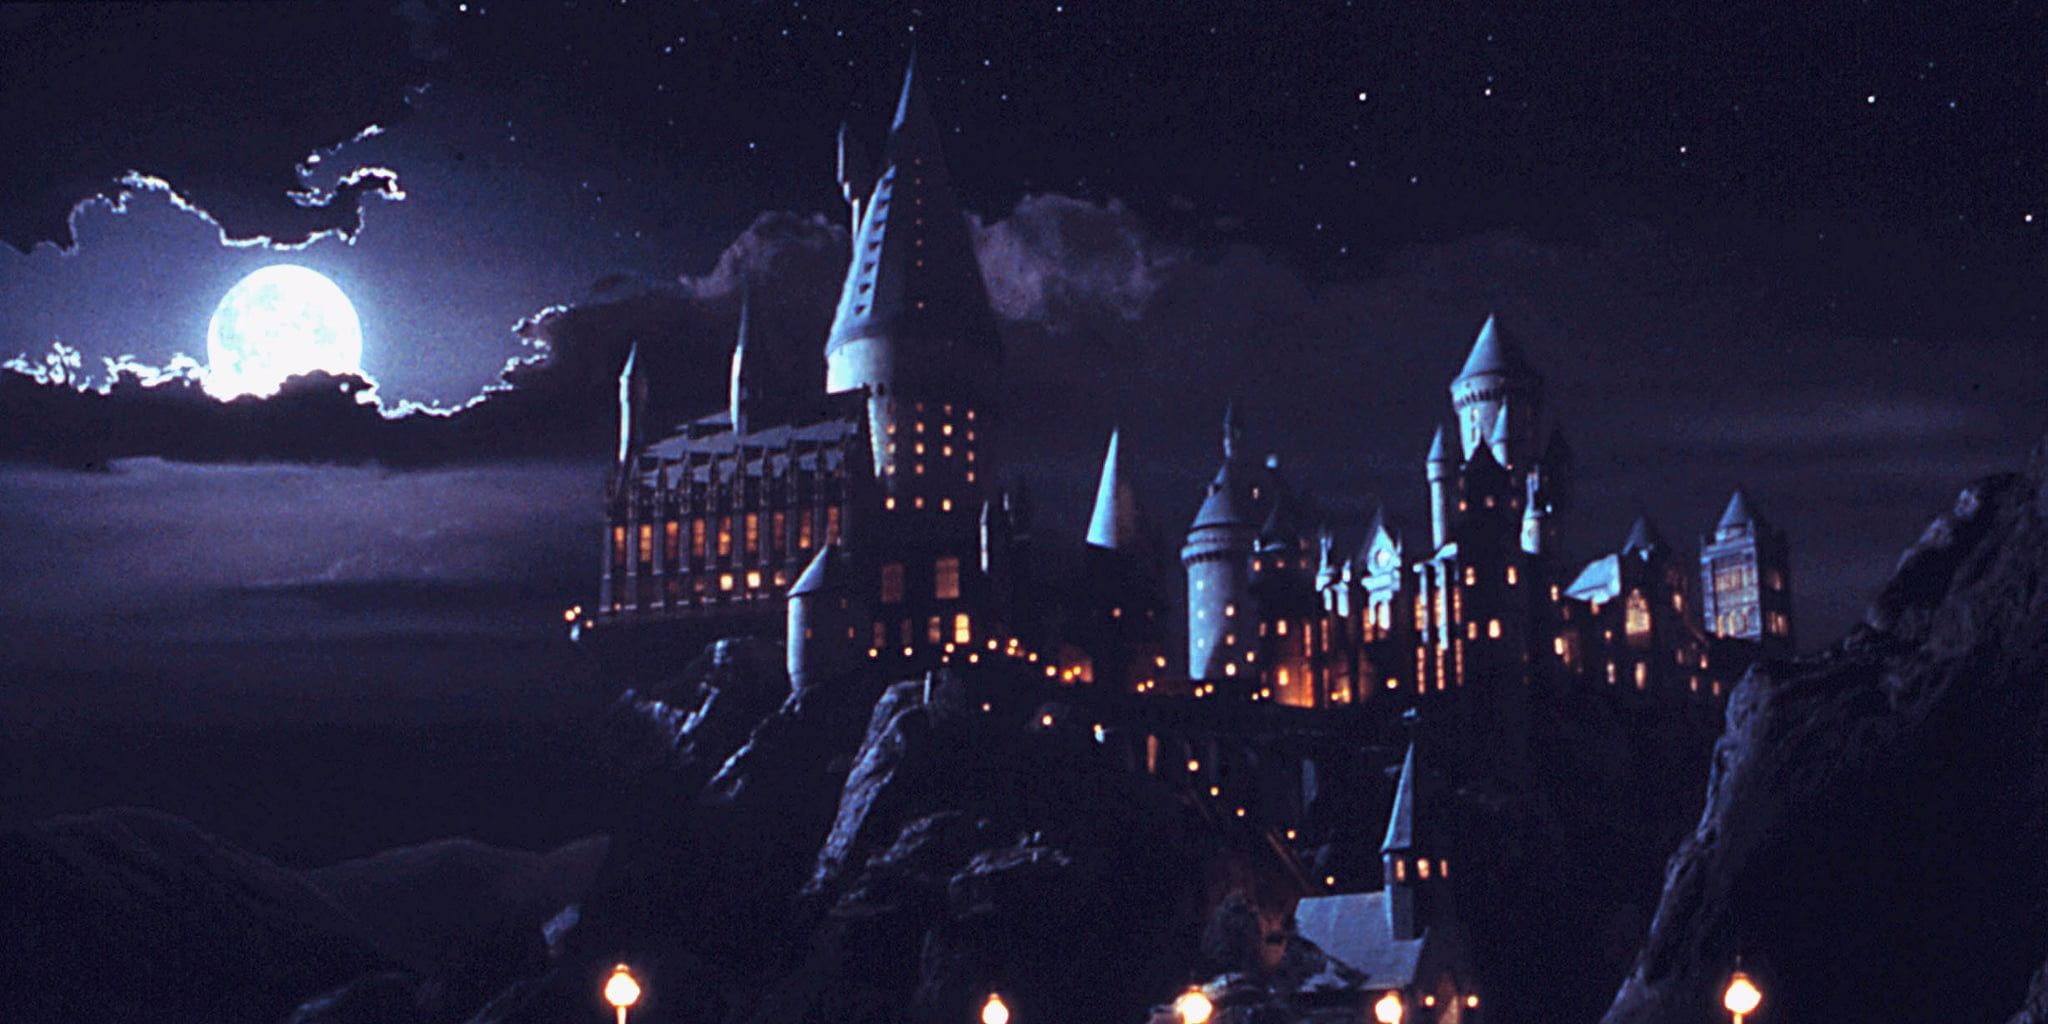 Hogwarts at night with a full moon